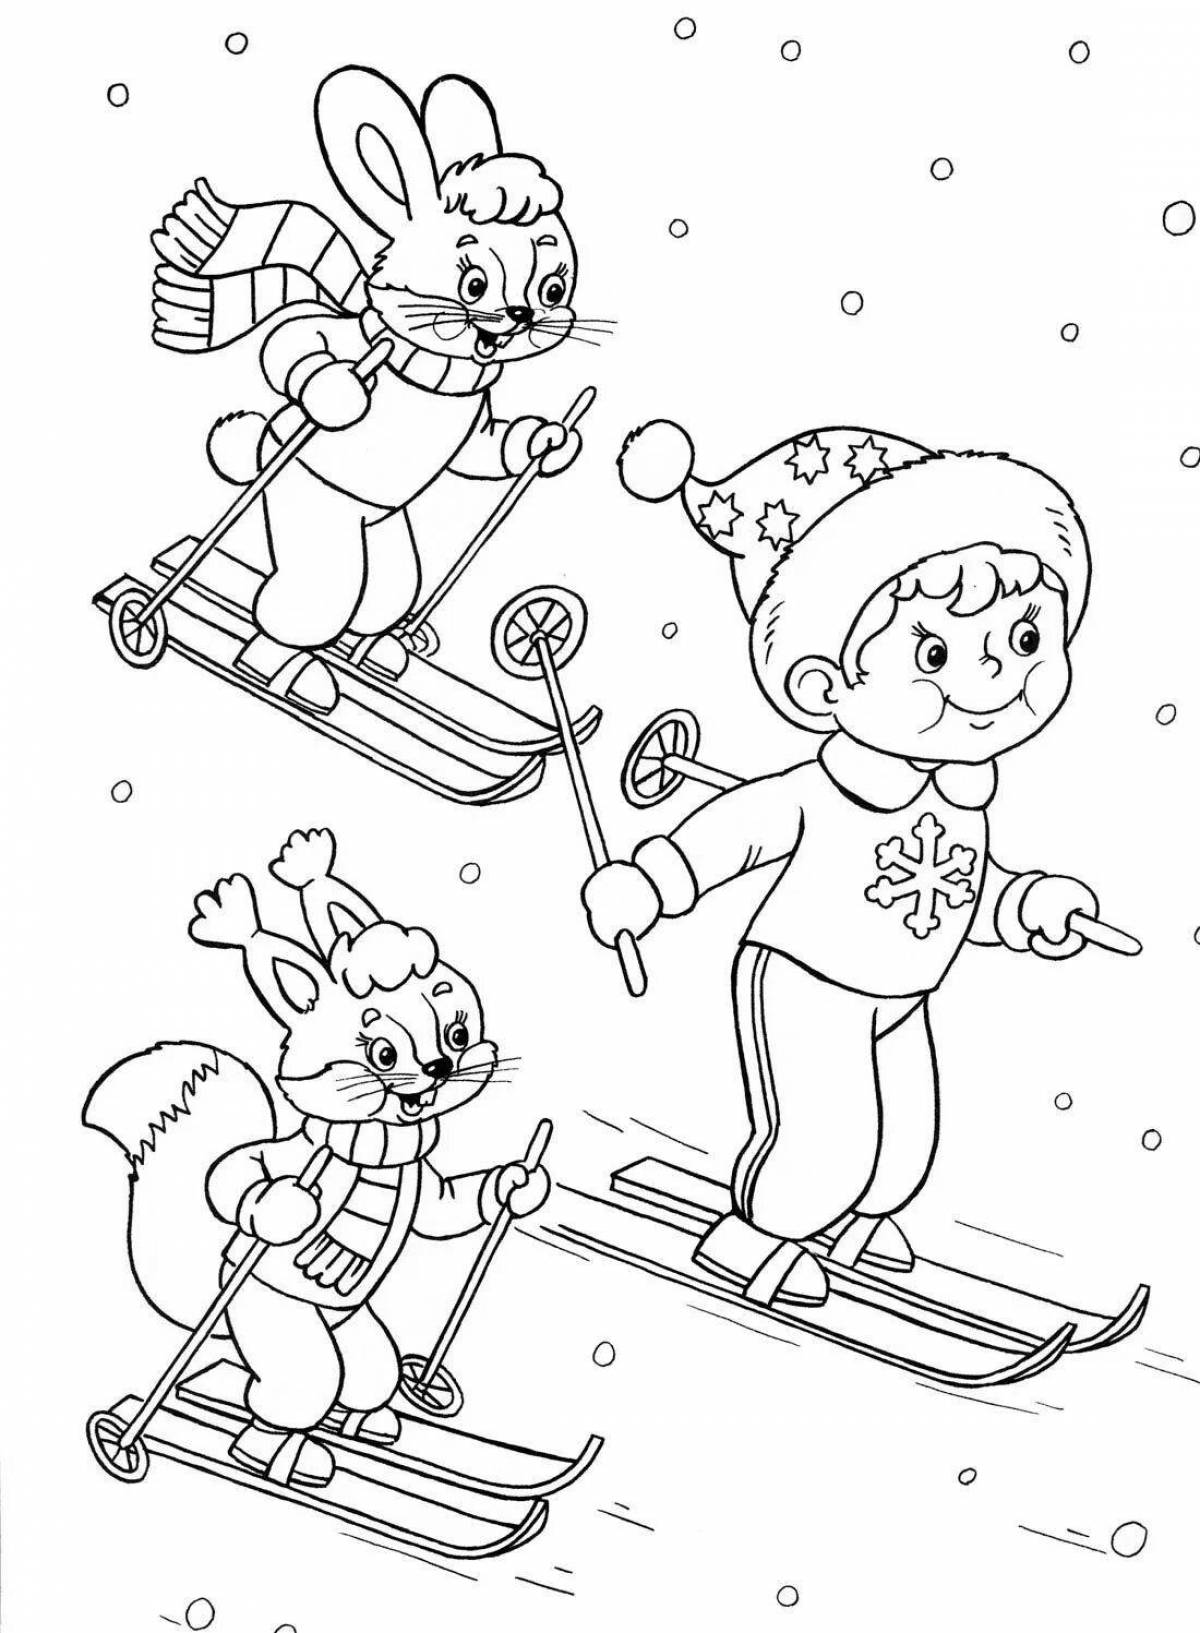 Coloring page adorable bear on skis